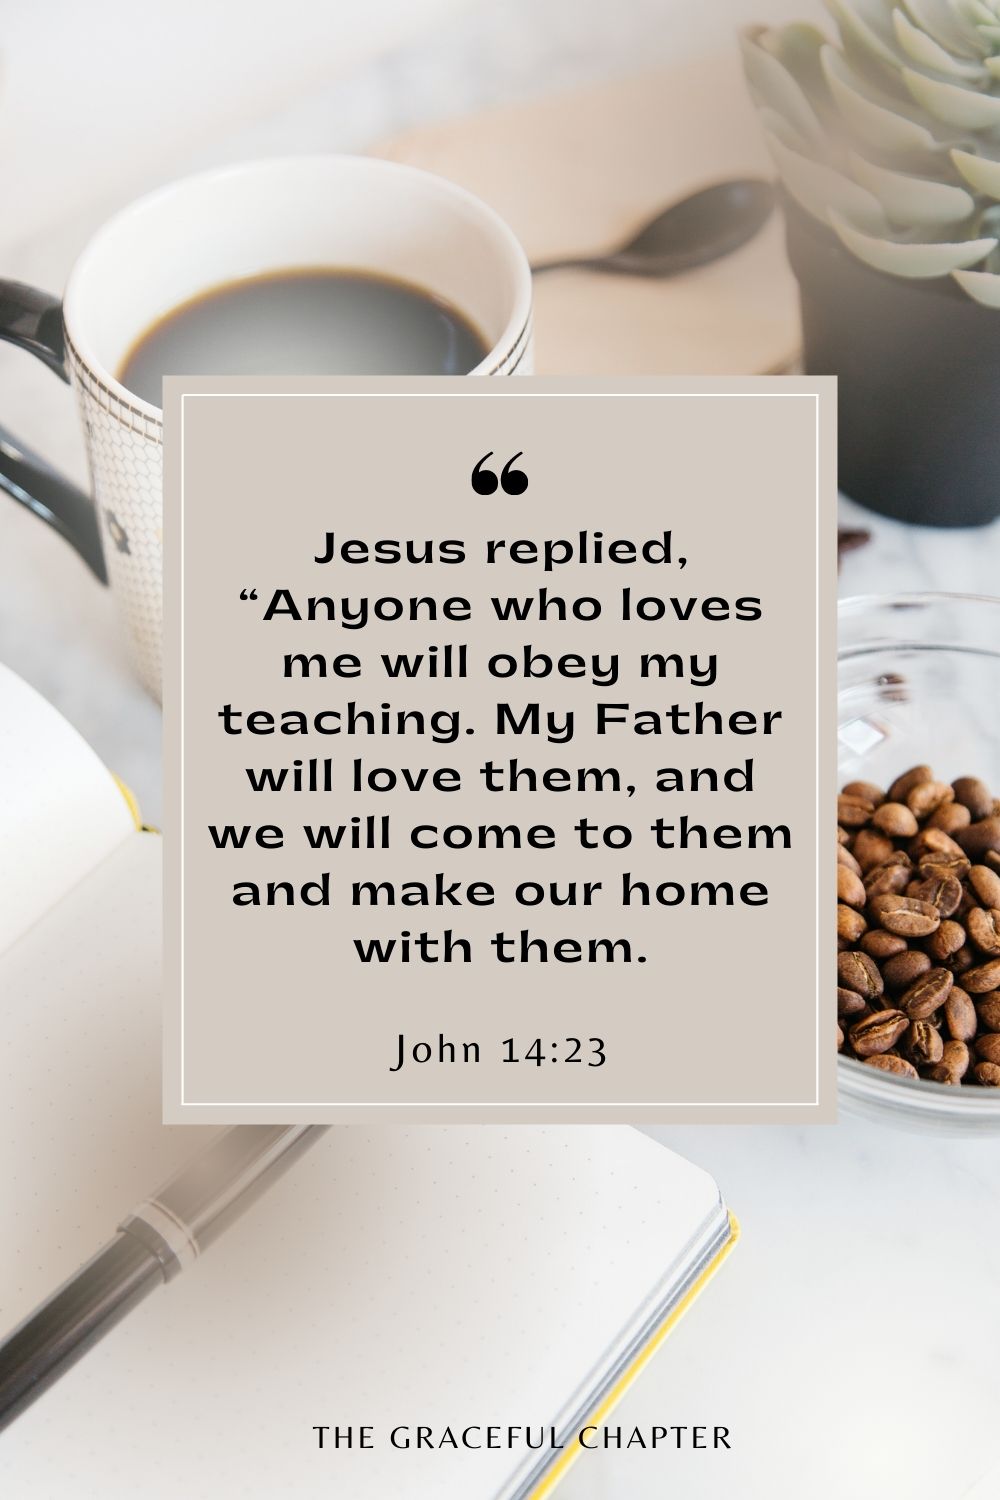 Jesus replied, “Anyone who loves me will obey my teaching. My Father will love them, and we will come to them and make our home with them. John 14:23